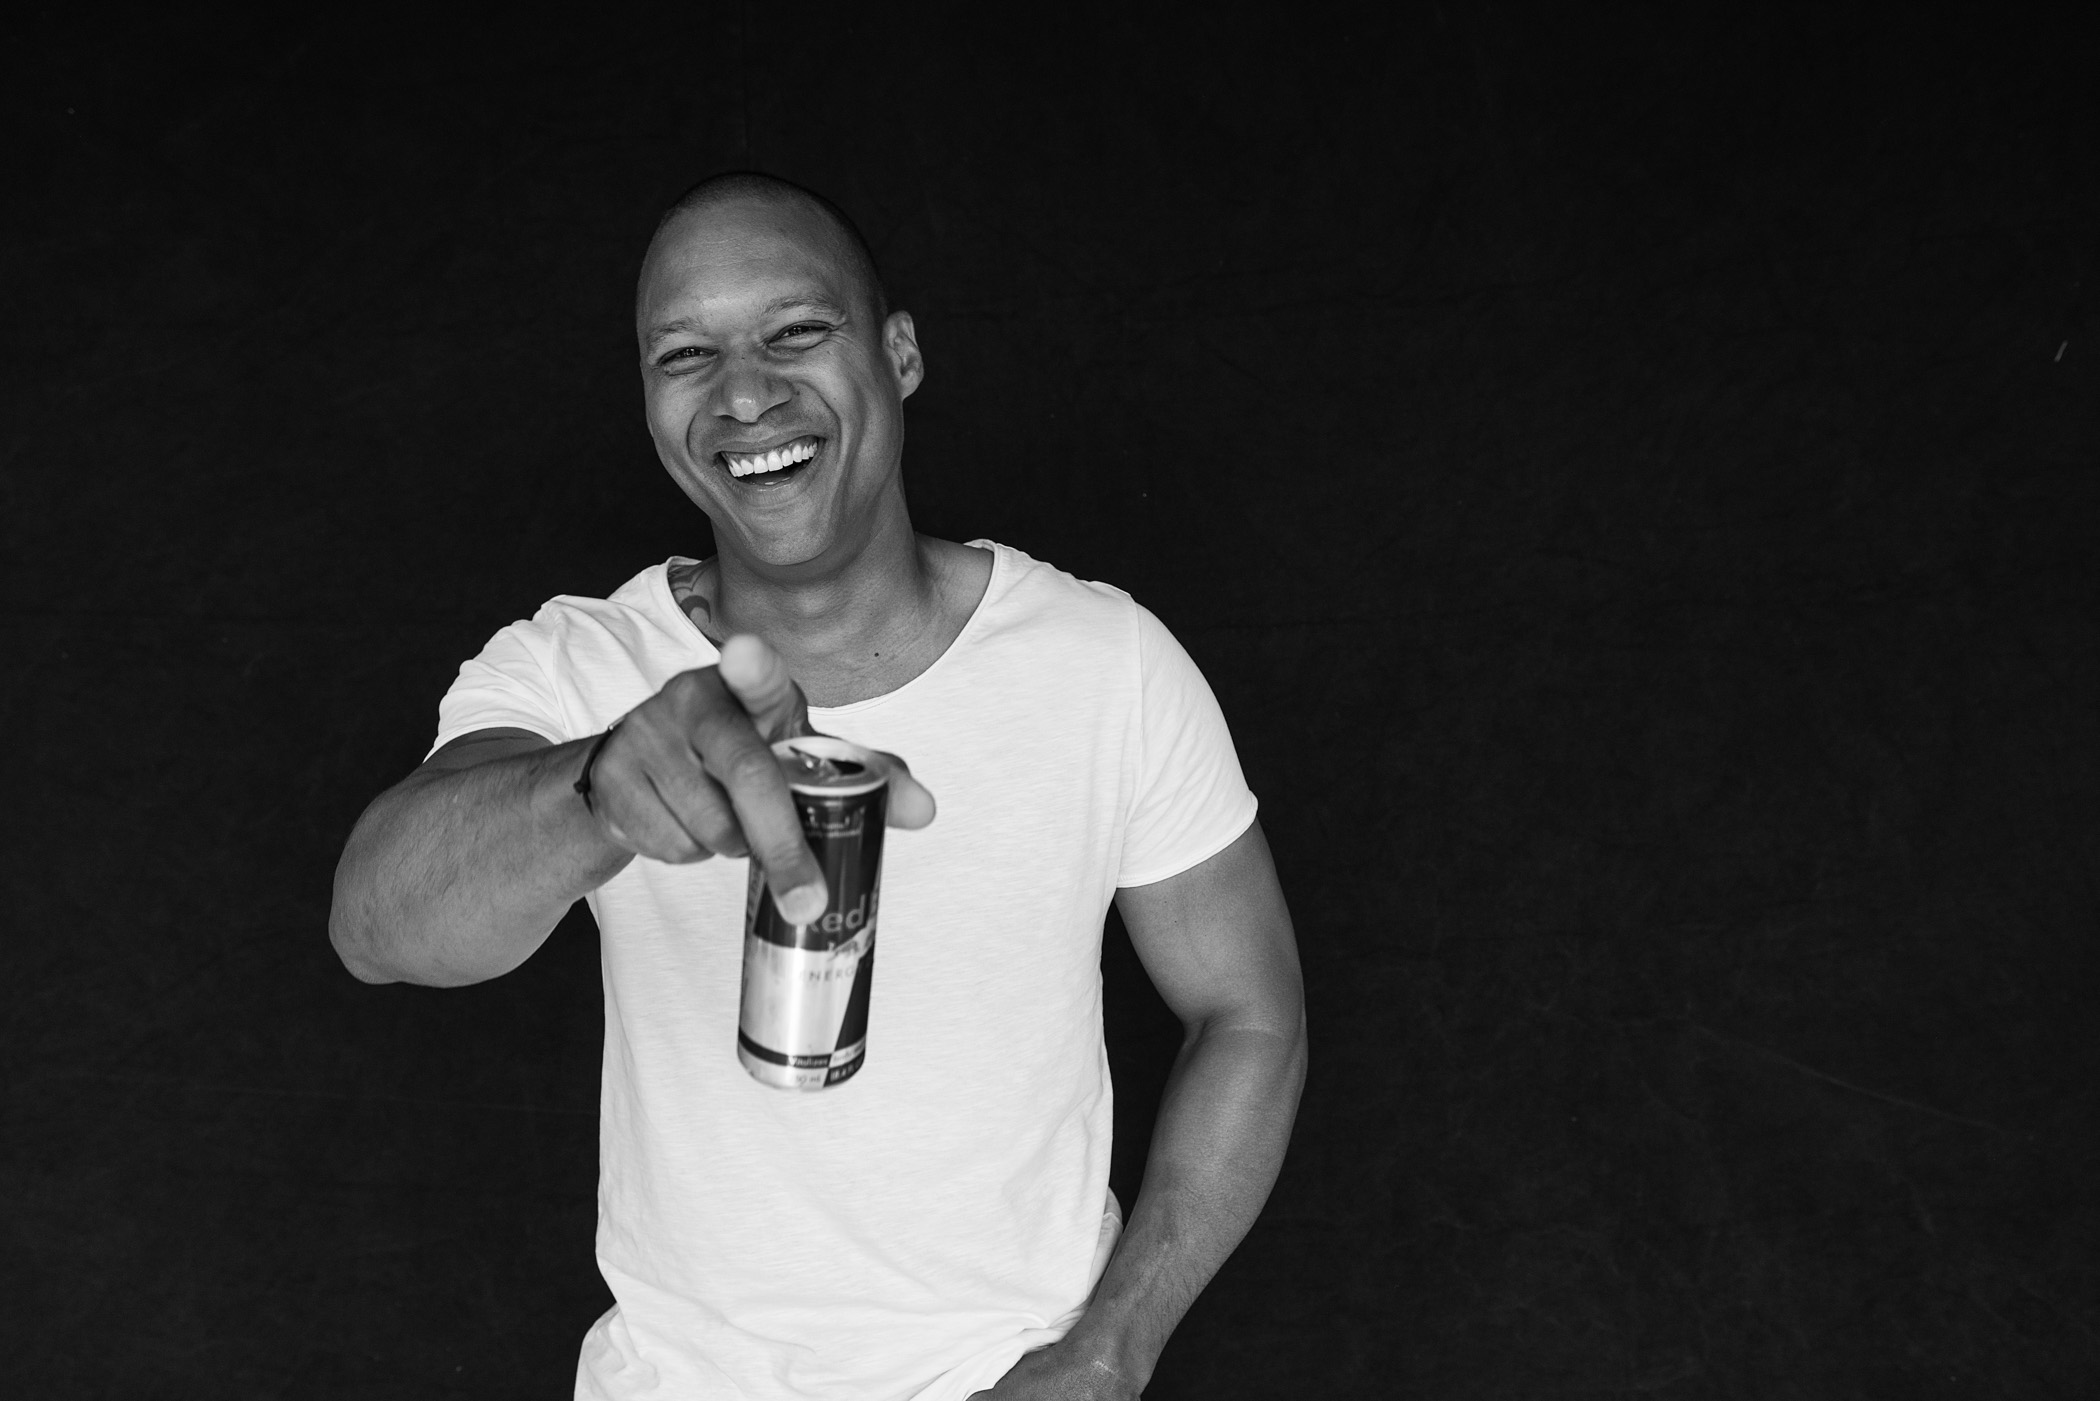 Red Bull leadership by by Boston based corporate portrait and lifestyle photographer Brian Nevins